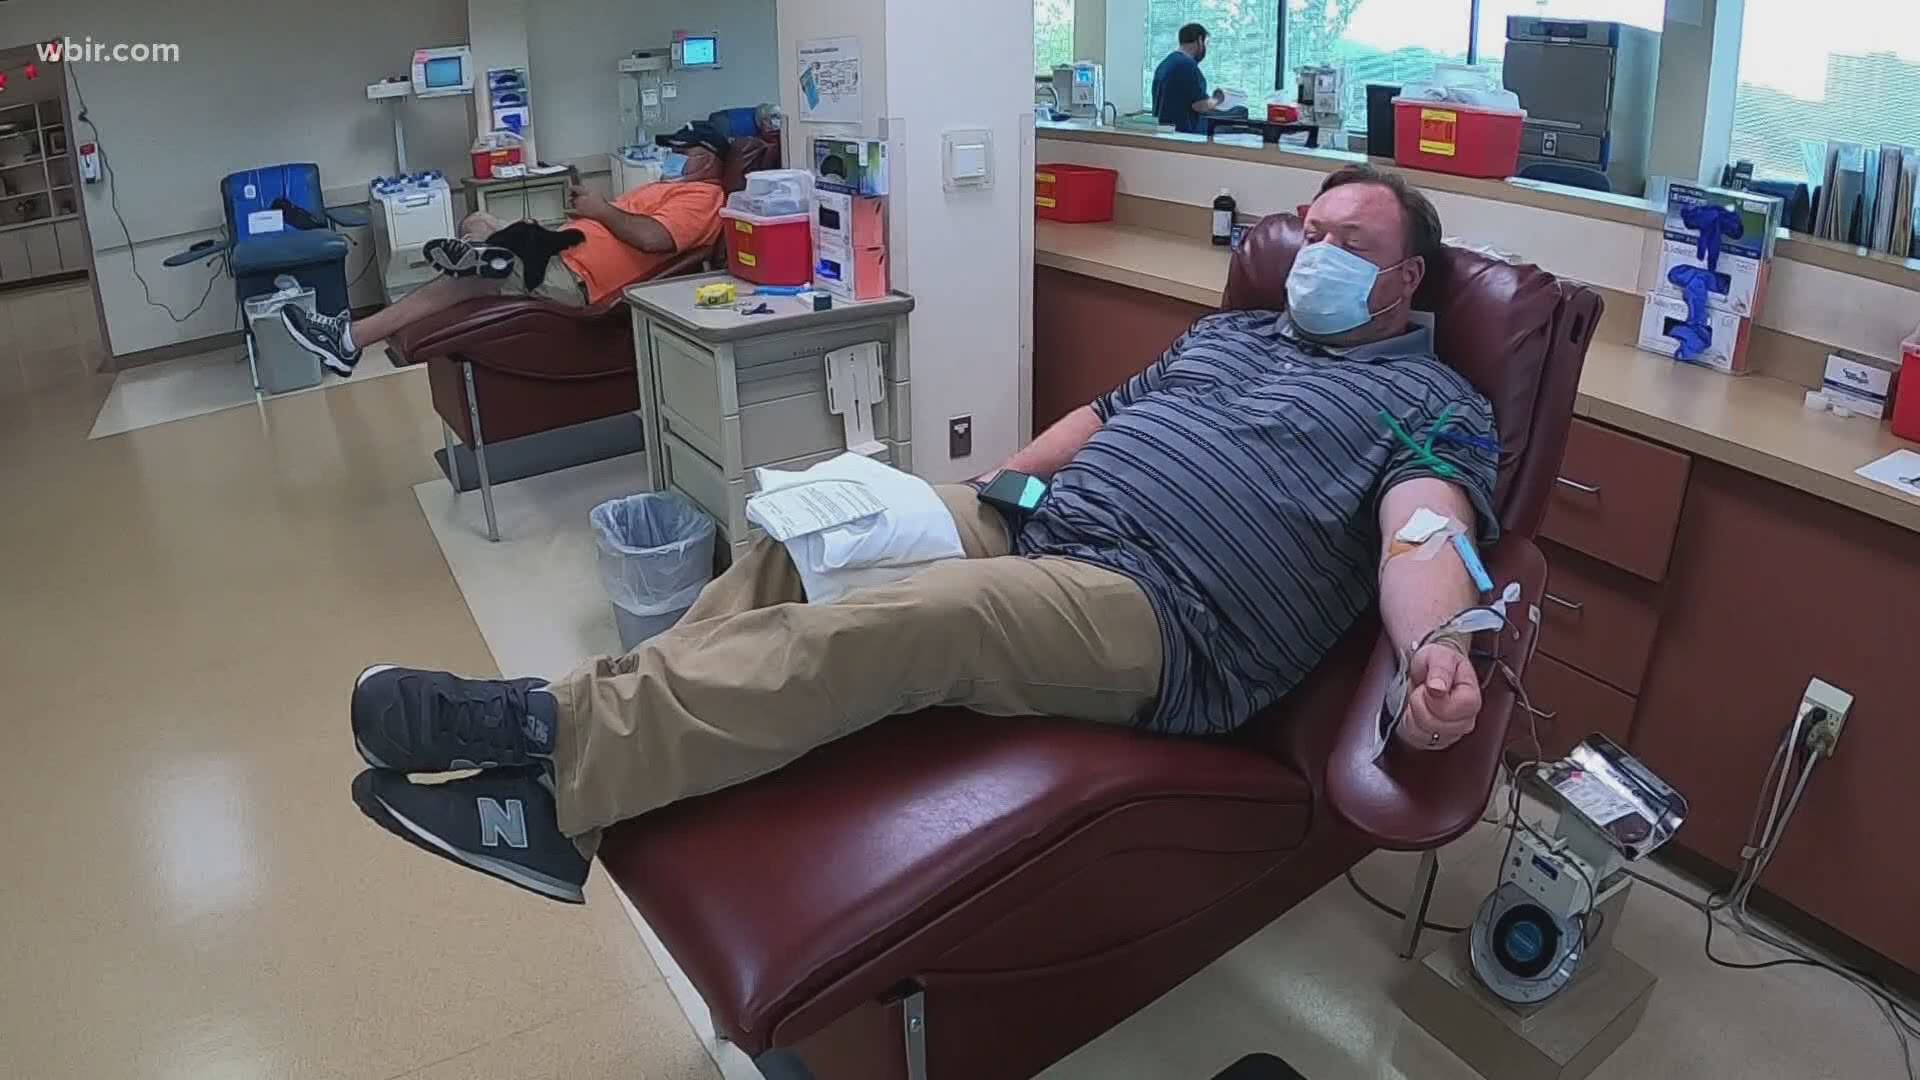 Mike Boice has given these life-saving donations for decades but this year, Mike is donating 'Convalescent Plasma' used to treat COVID-19 patients in hospitals.